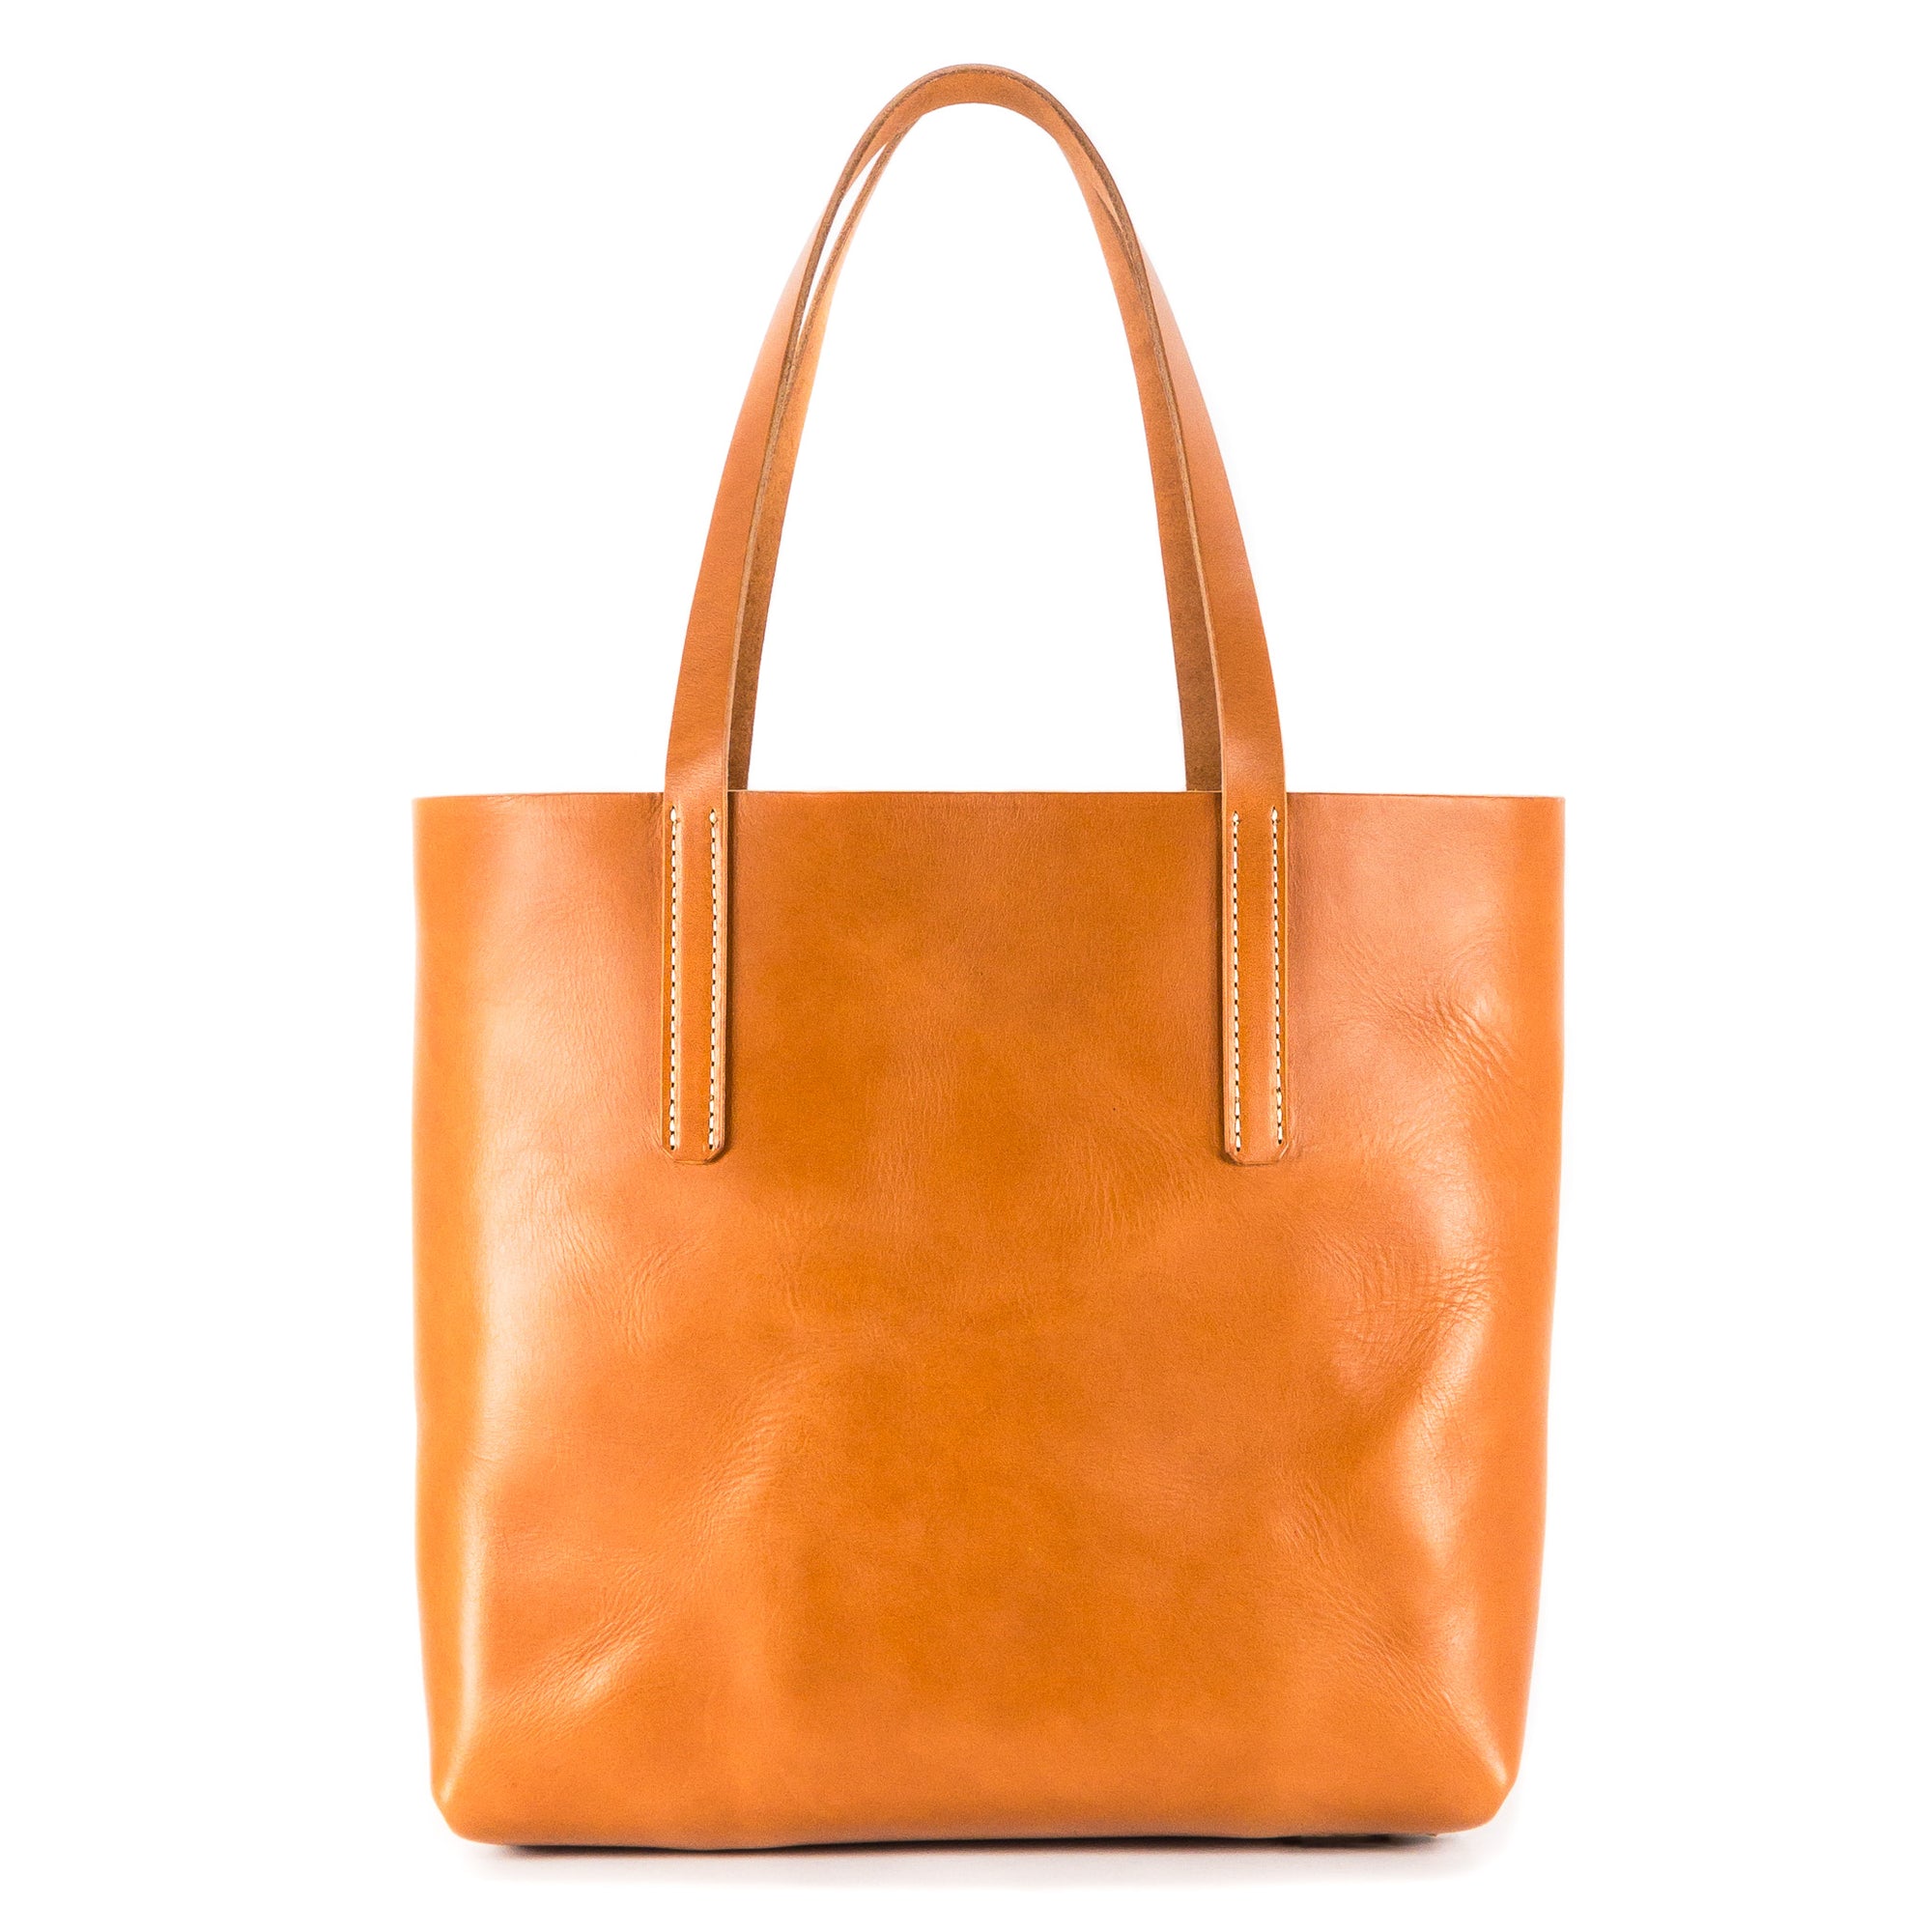 English Bridle Leather Tote Bag in English Tan - Everyday Heirloom Bag ...